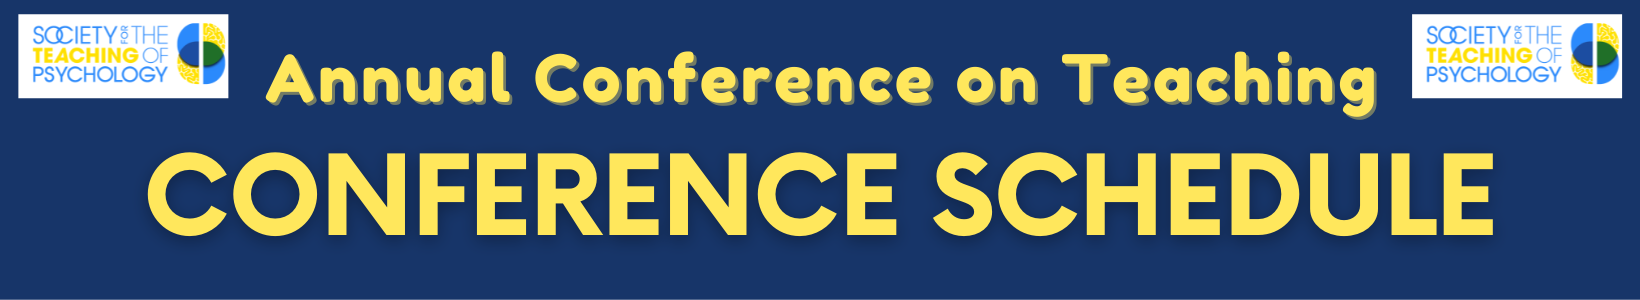 Annual Conference on Teaching Conference Schedule